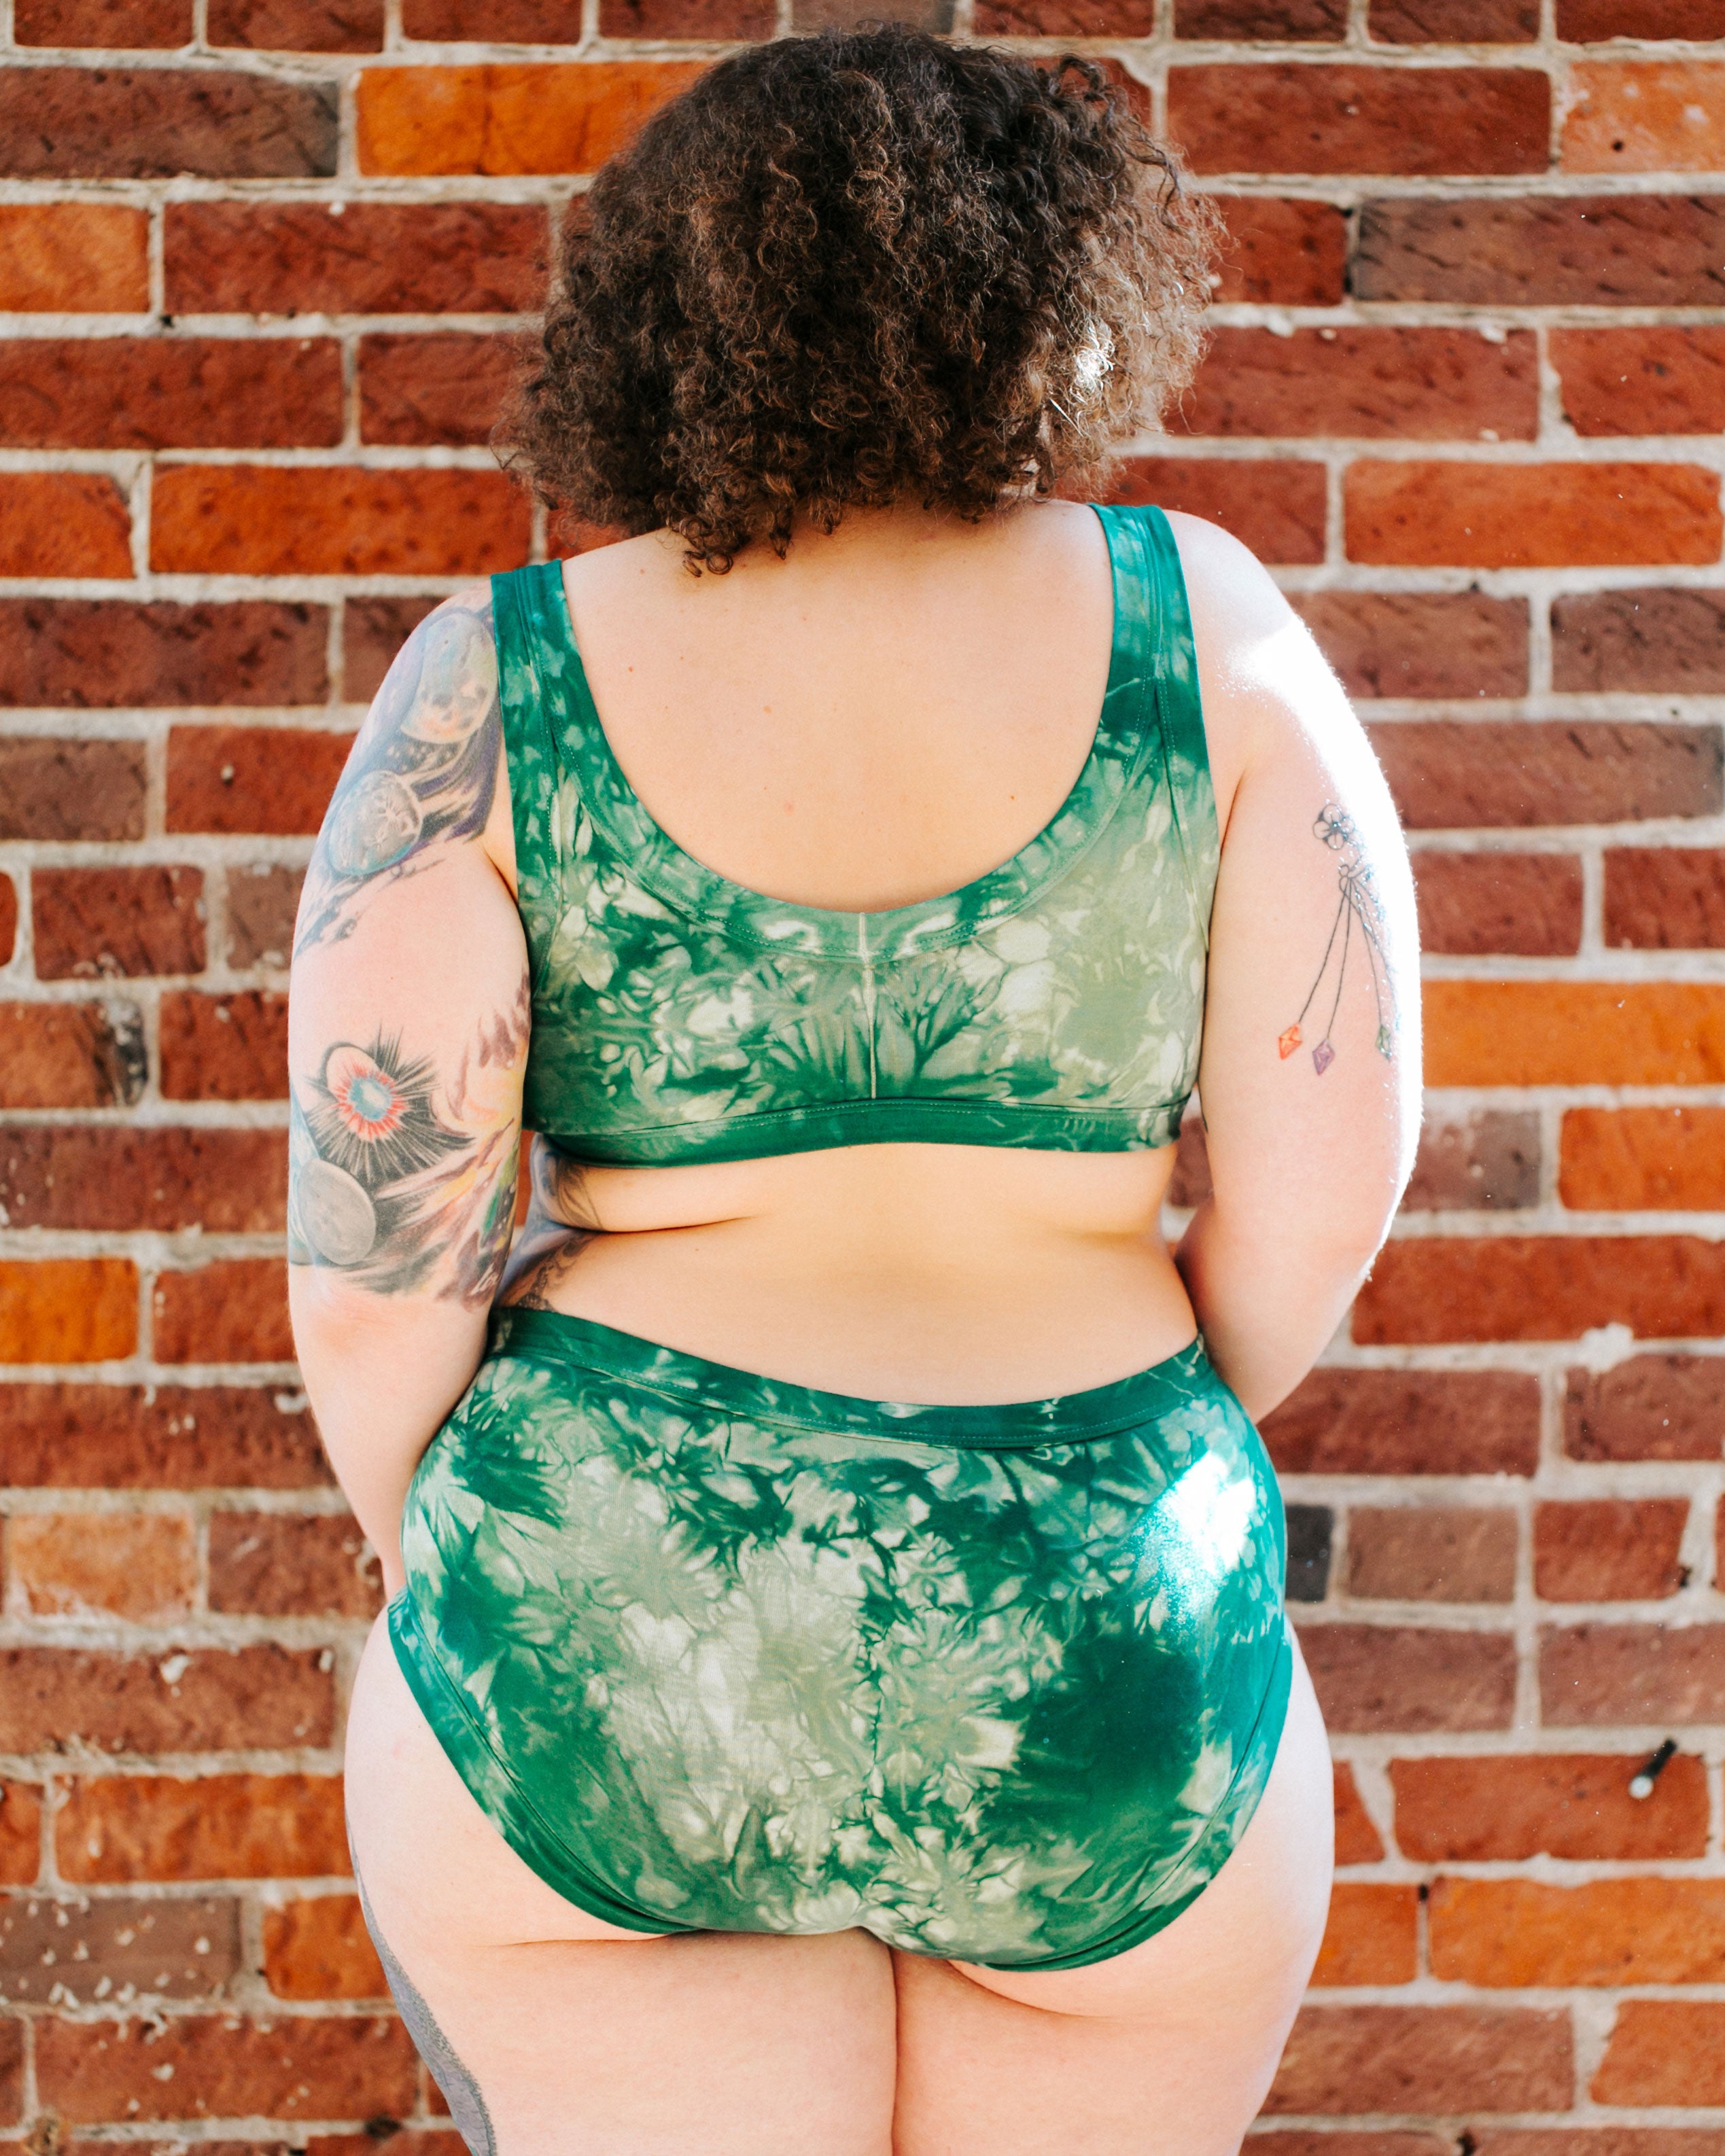 Back of model wearing Thunderpants organic cotton Hipster style underwear and Bralette in Clover Green scrunch dye.